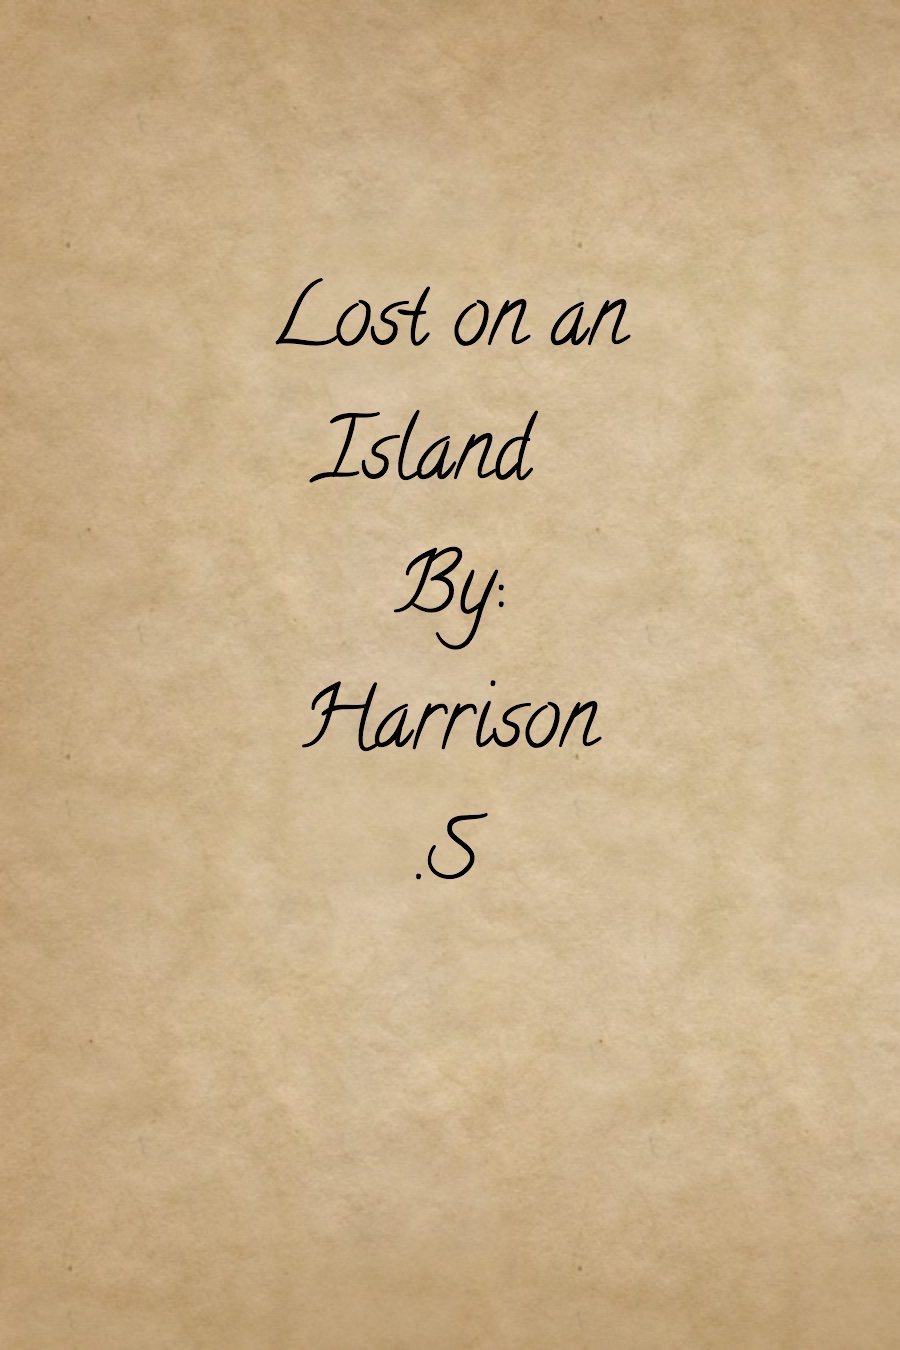 Lost on an Island